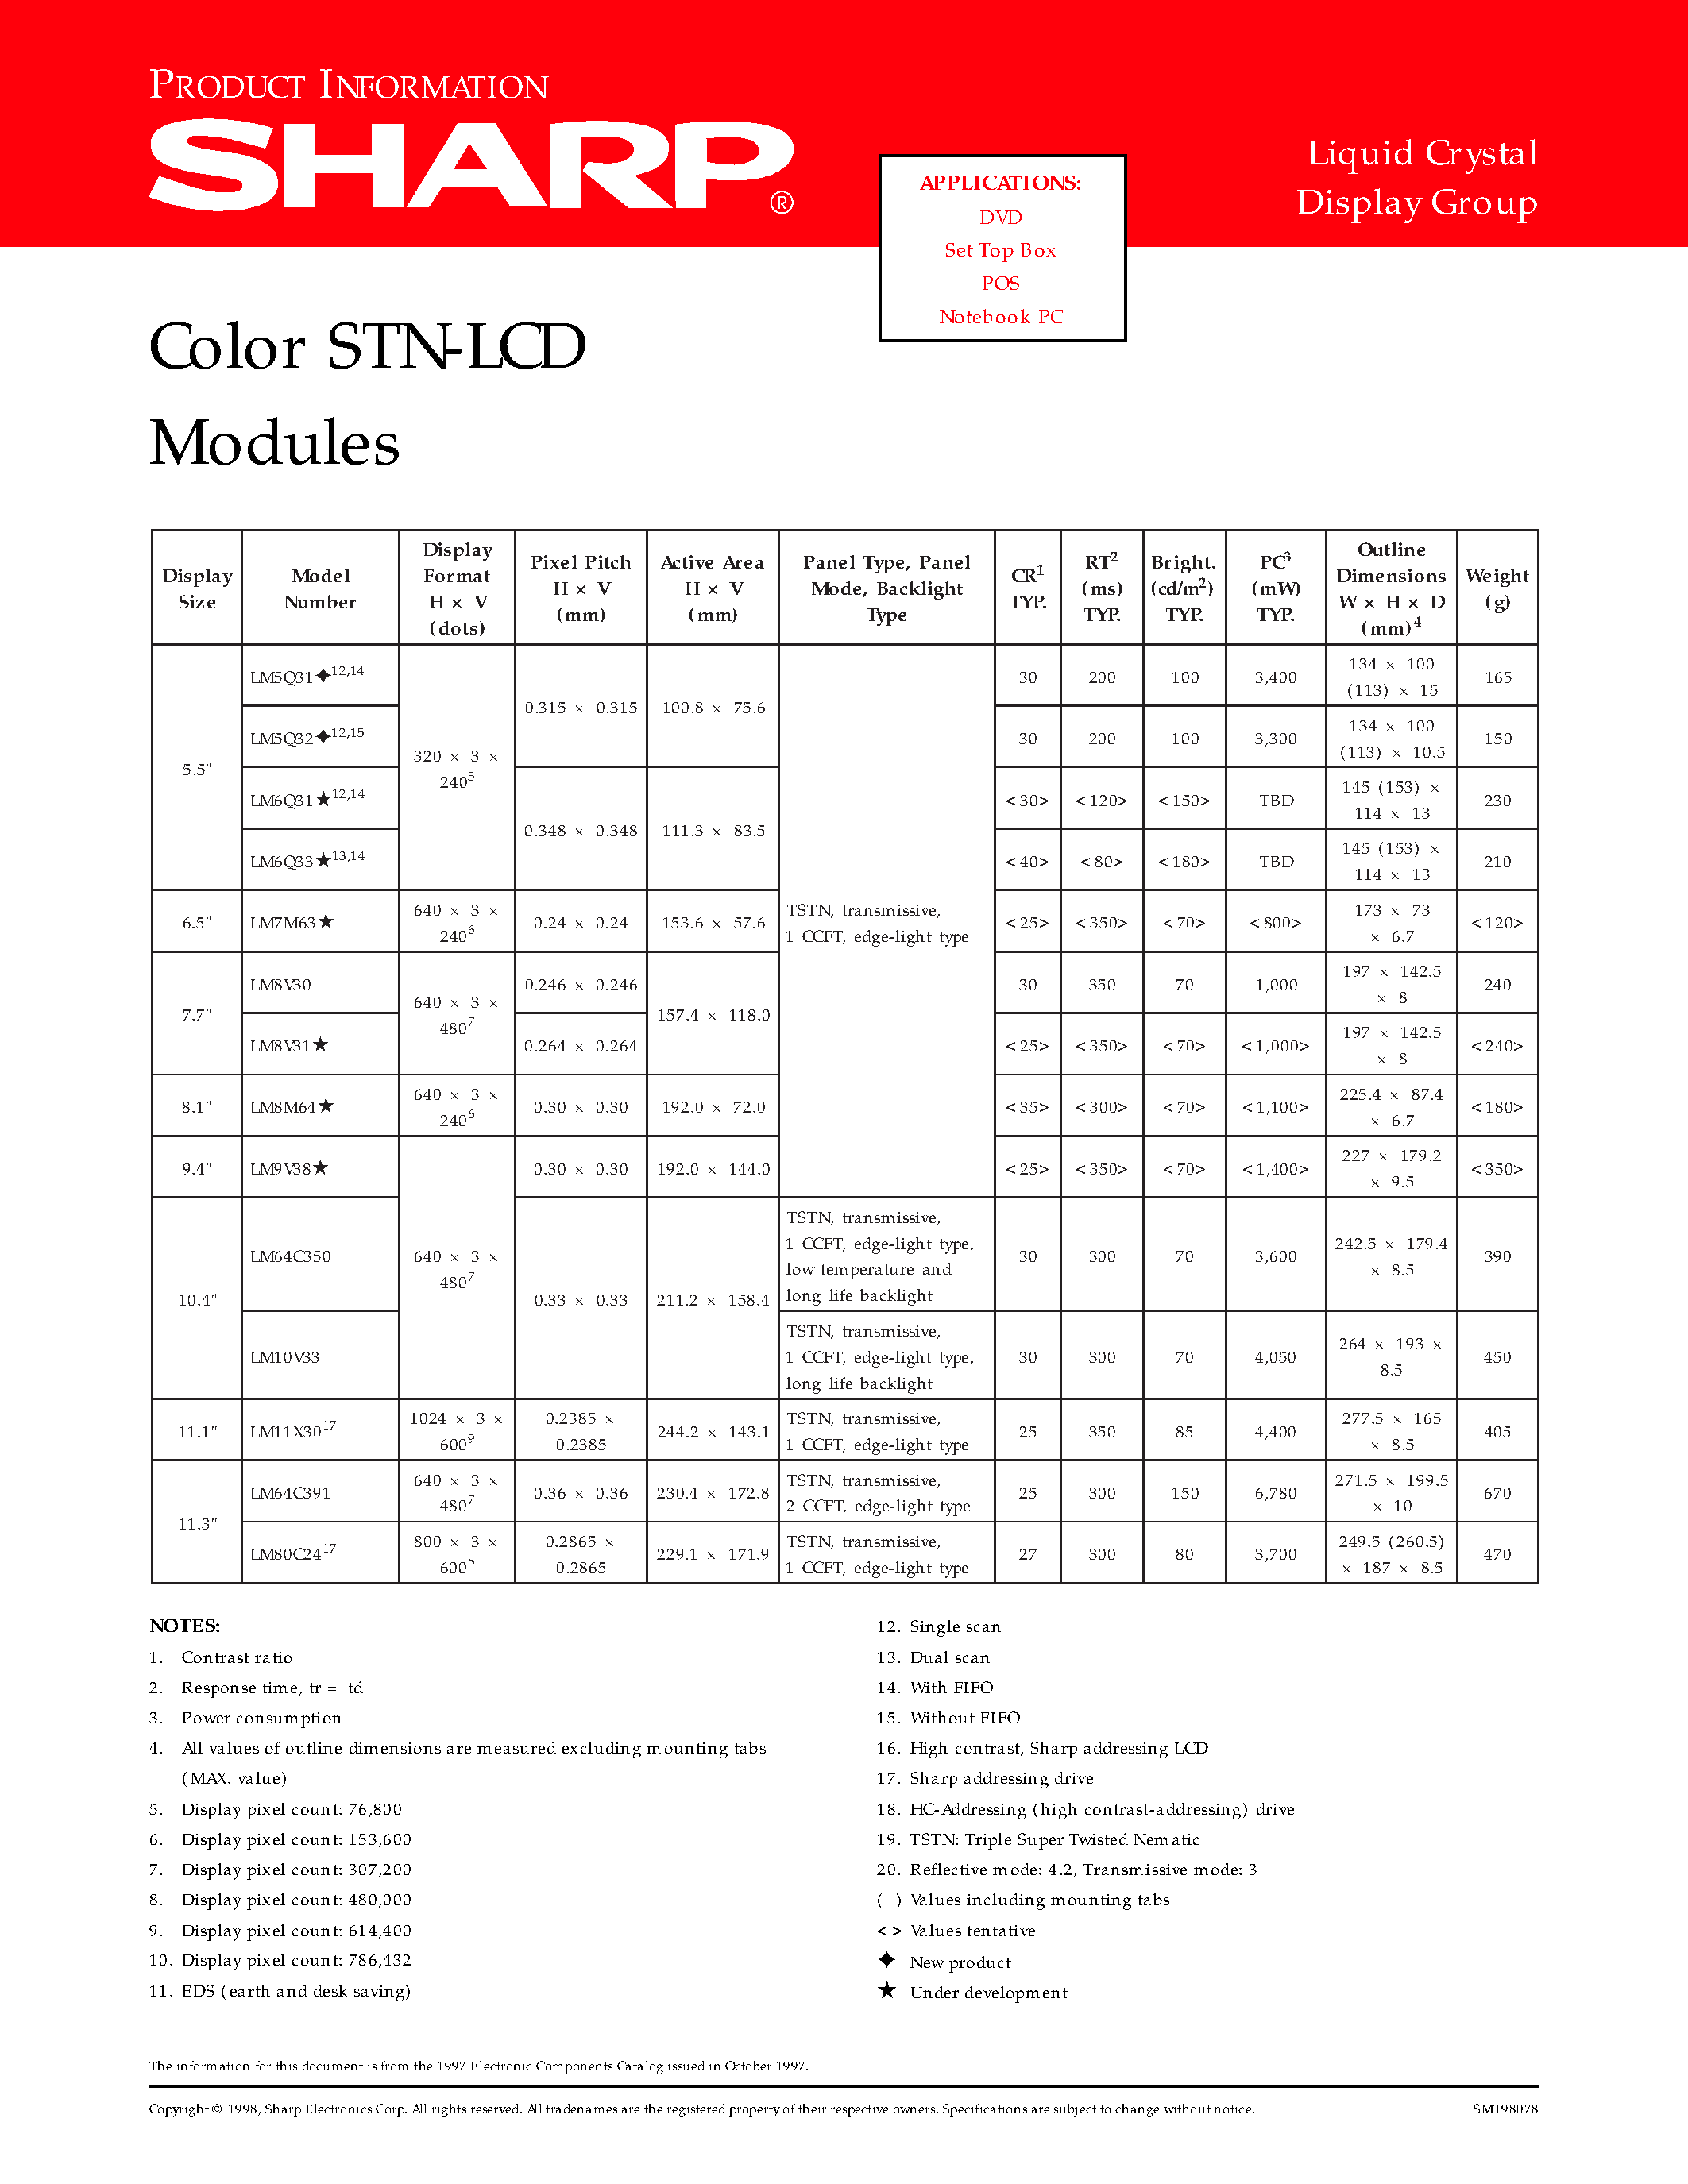 Datasheet LM80C24 - Color STN-LCD Modules page 1